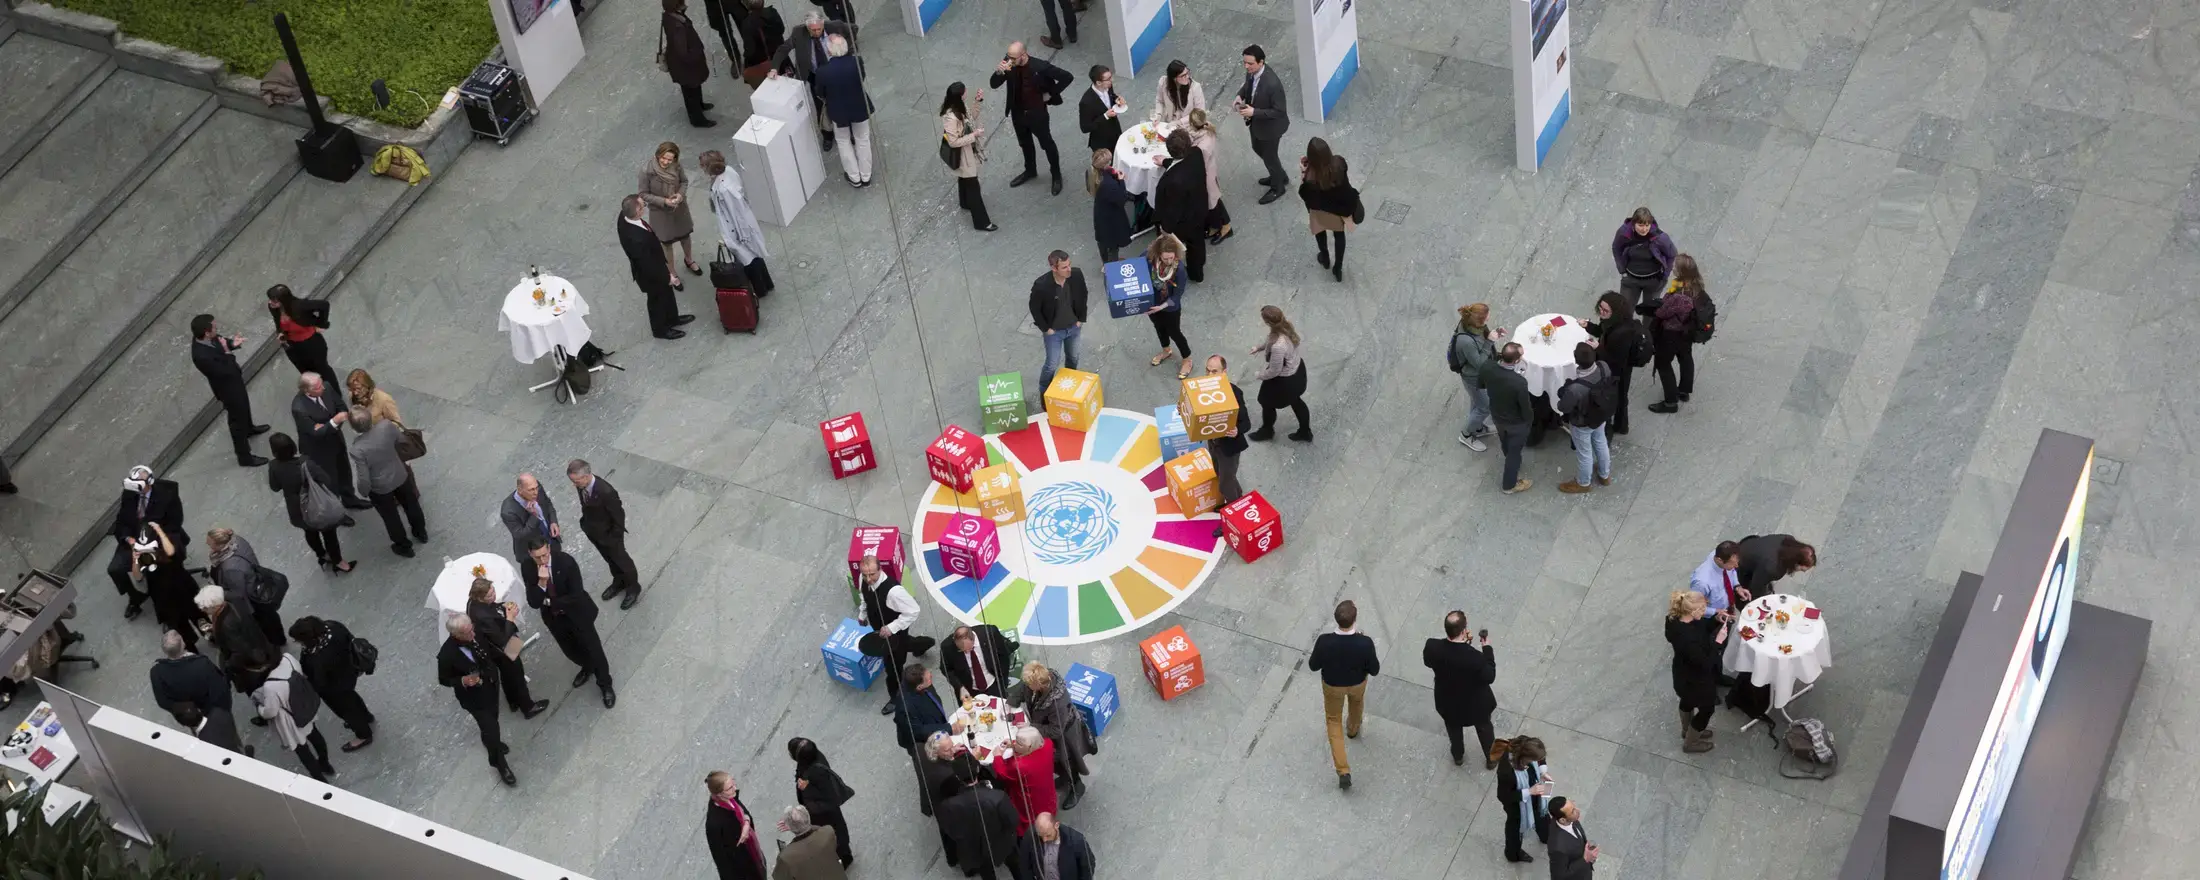 People in an event, gathering around boxes of the Sustainable Development Goals